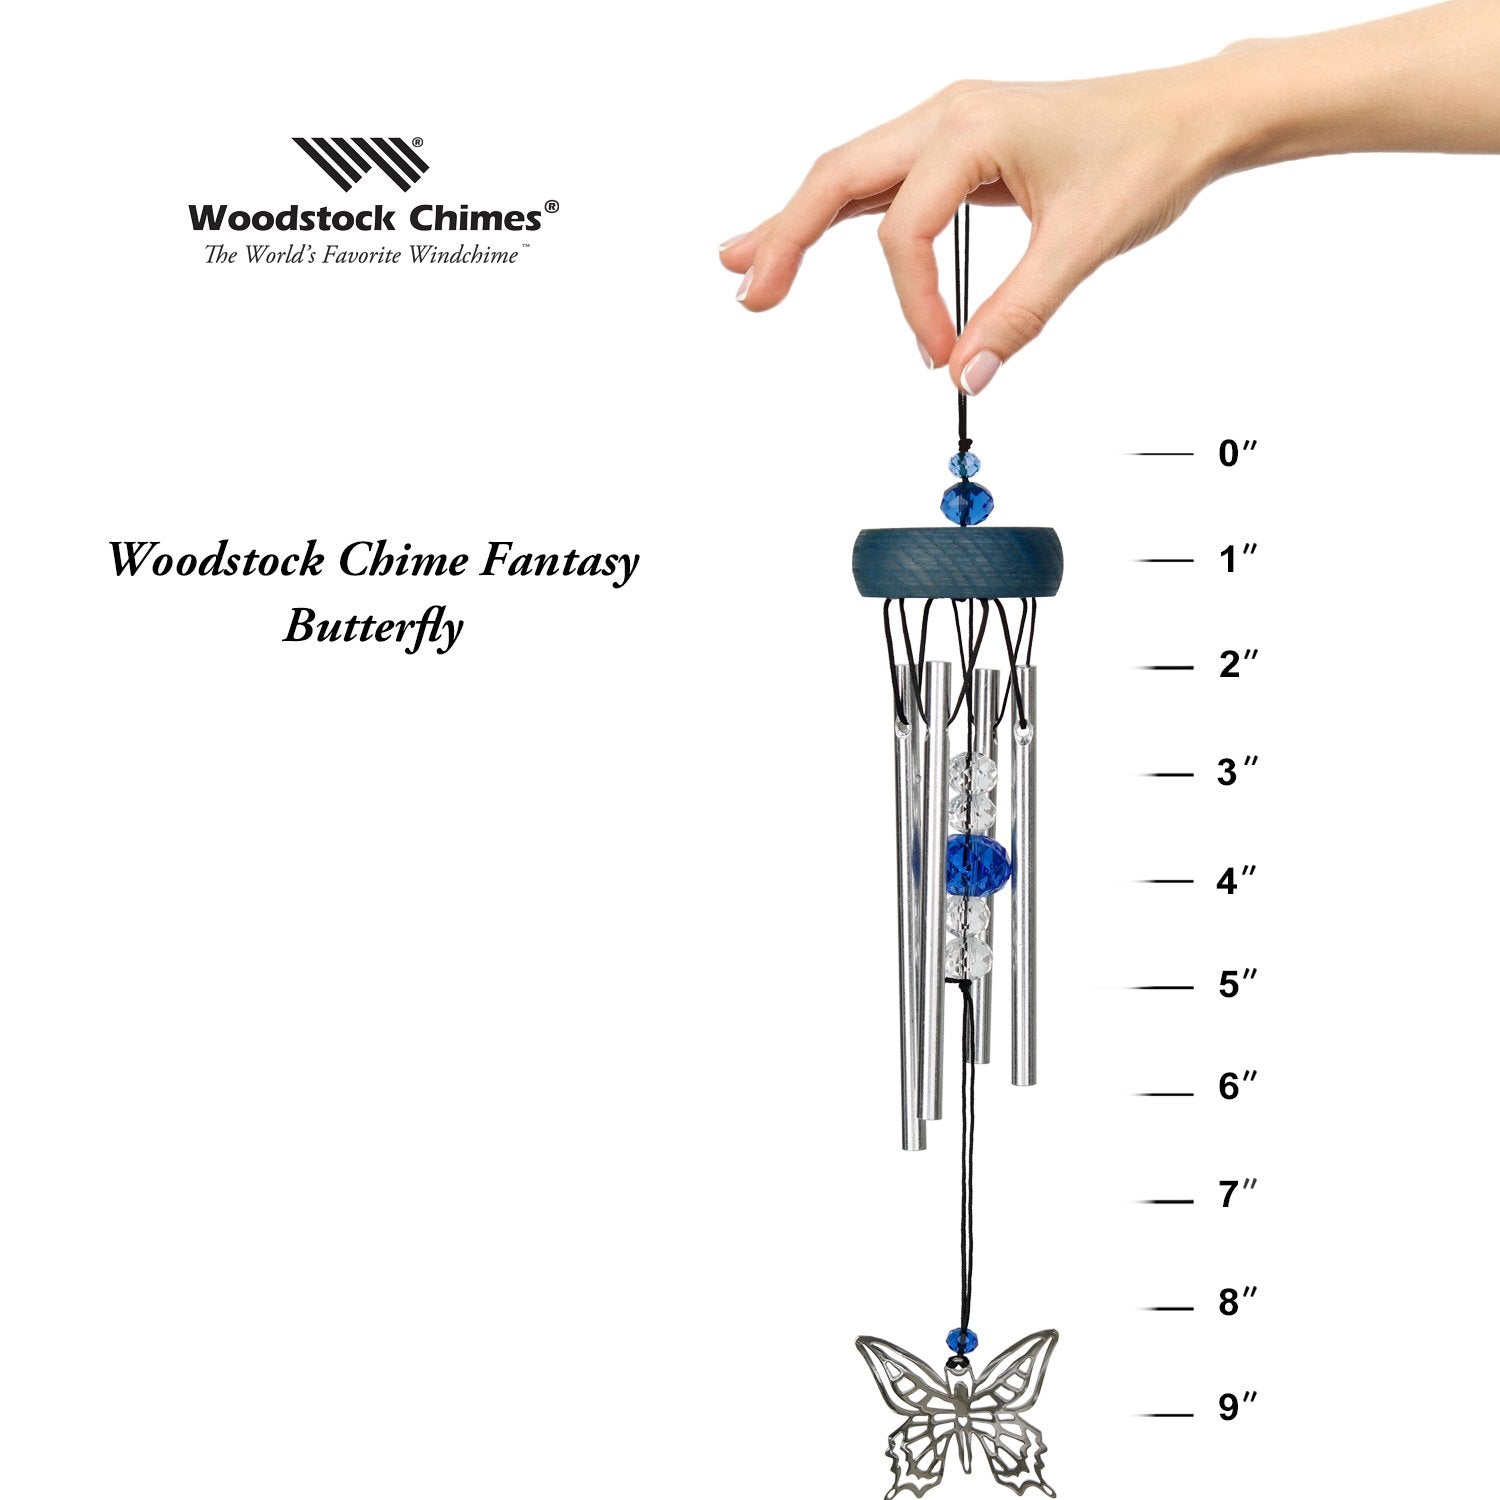 Chime Fantasy - Butterfly proportion image